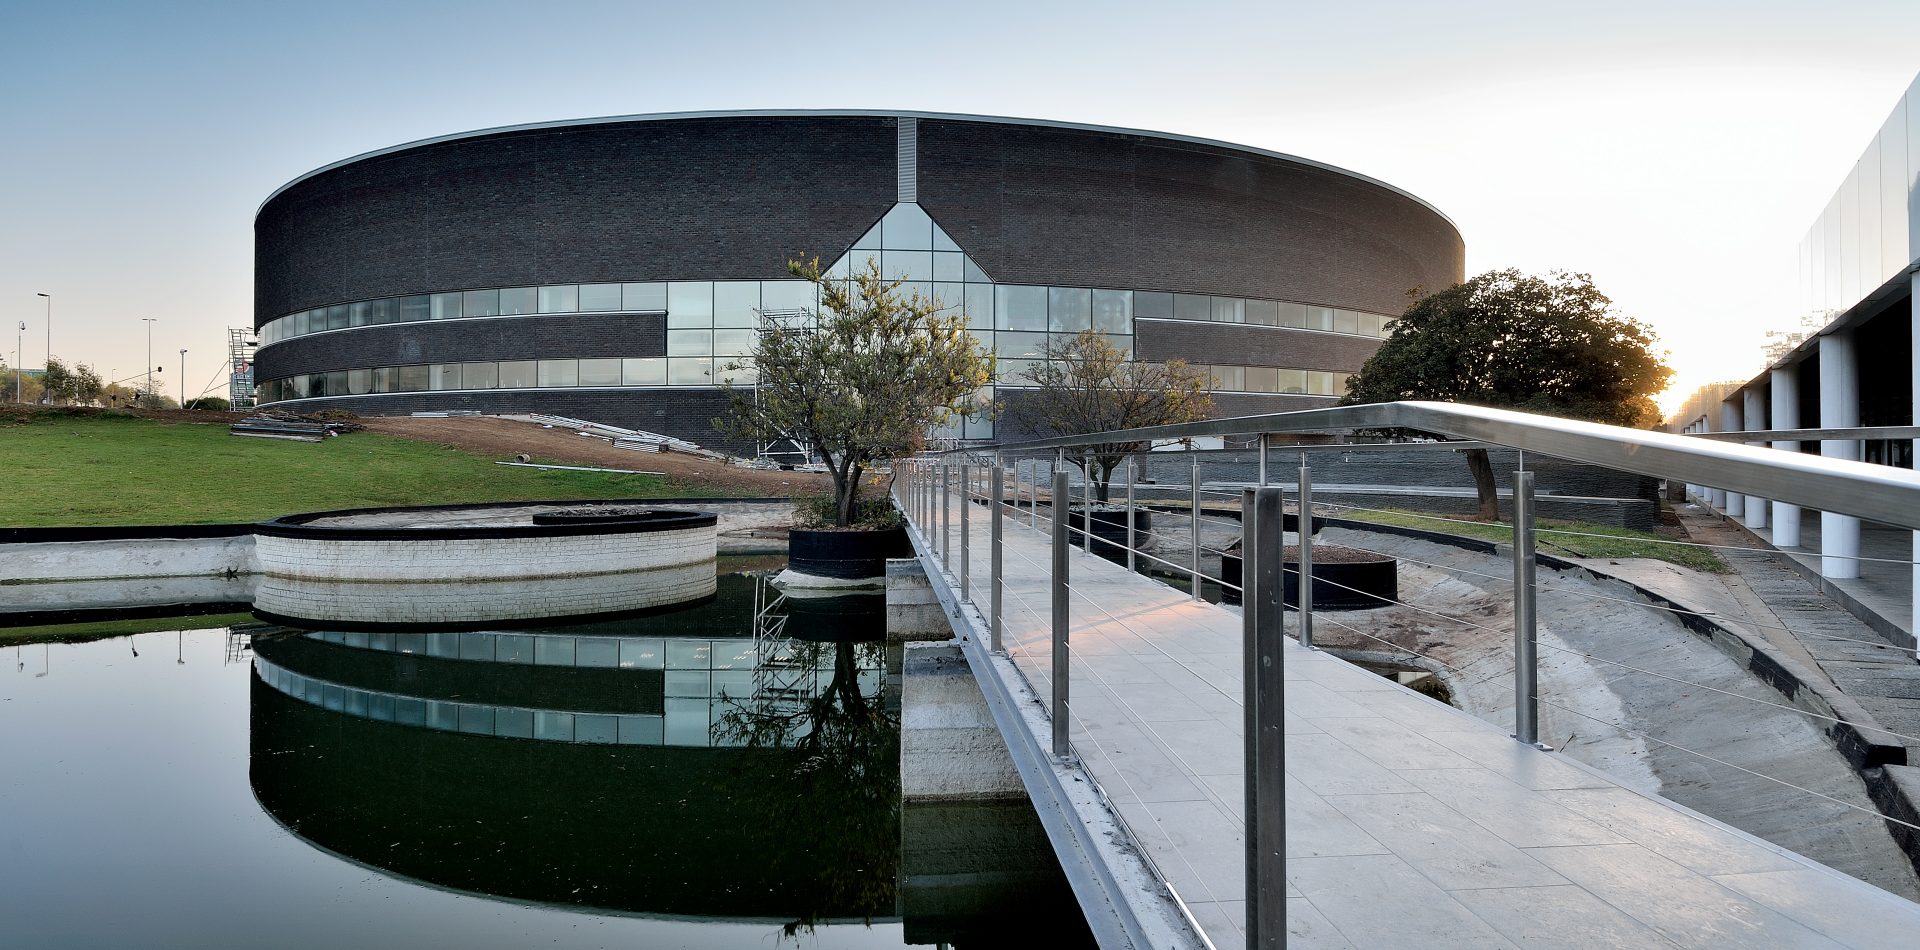 This picture shows the Exterior view of the National Sales Company on the Campus in Midrand.